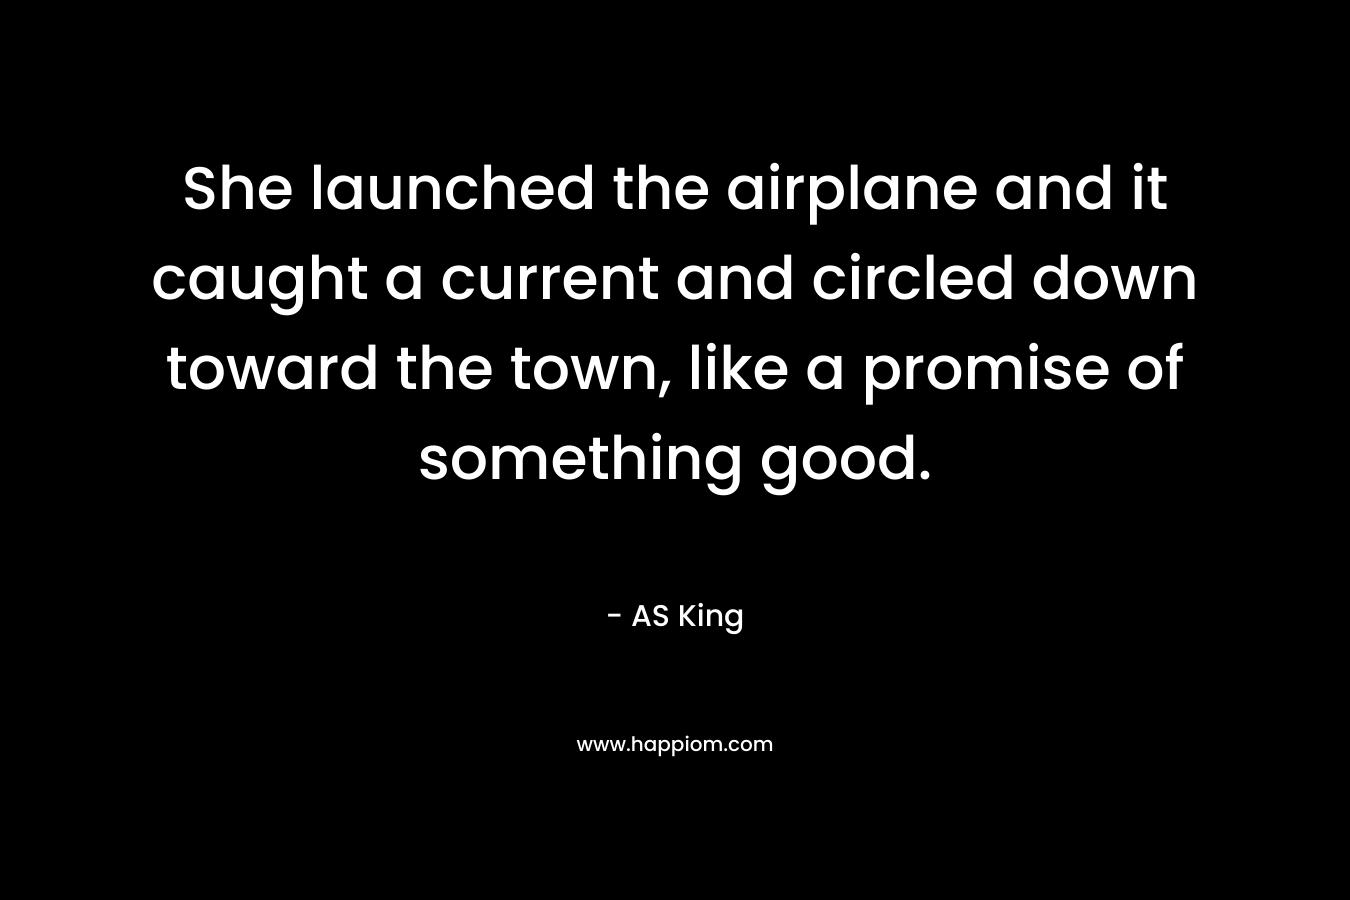 She launched the airplane and it caught a current and circled down toward the town, like a promise of something good. – AS King